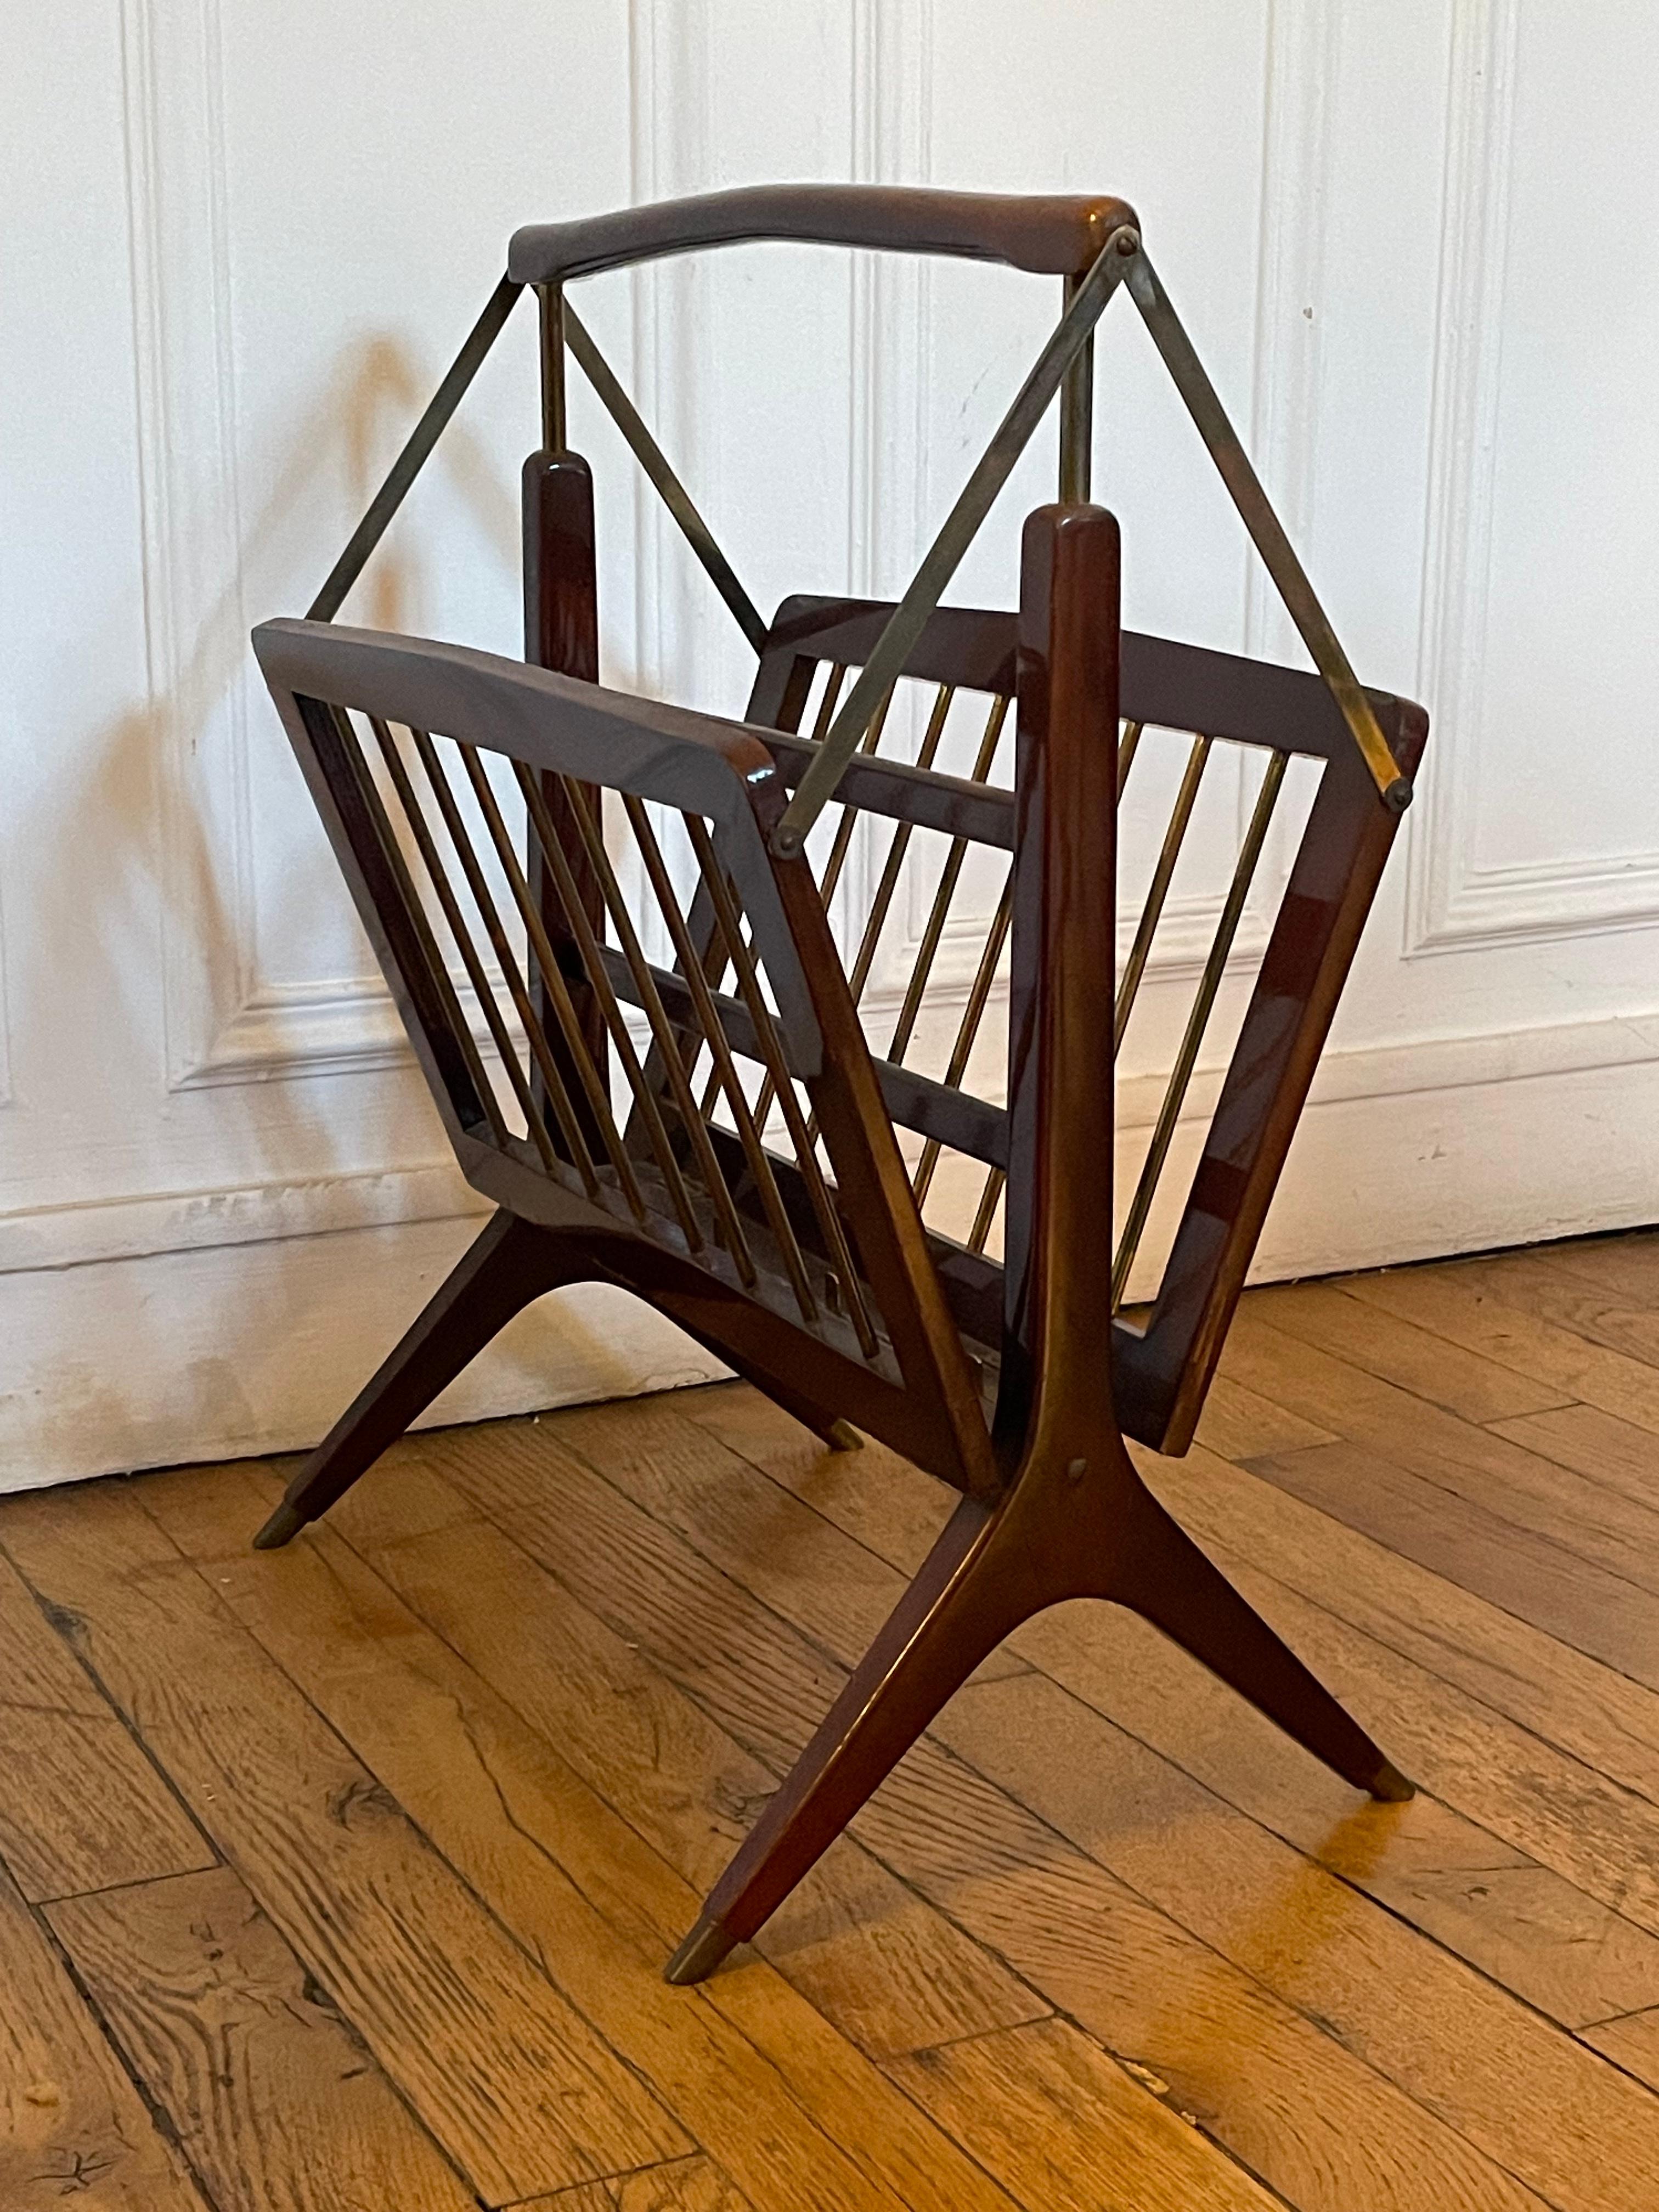 Beautiful designer magazine rack designed by Cesare Lacca in Italy in the 1960s.
The magazine rack is made of brass and walnut wood.
The magazine rack is foldable. This is a rare find, still in excellent condition.

Length 44 cm
Height 54 cm
Depth